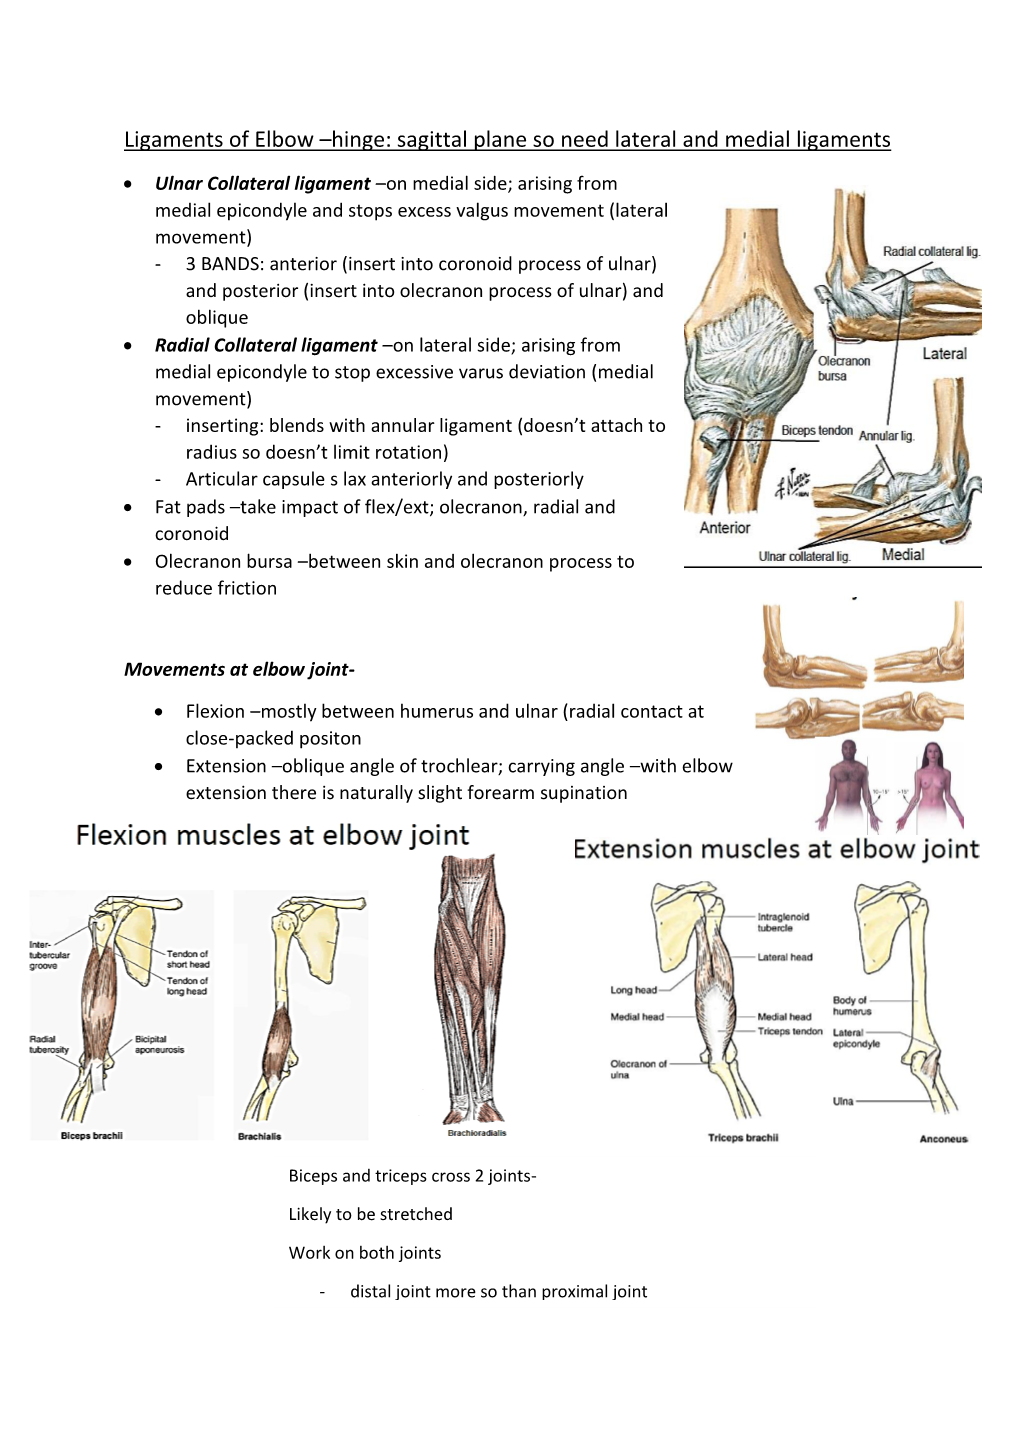 Ligaments of Elbow –Hinge: Sagittal Plane So Need Lateral and Medial Ligaments